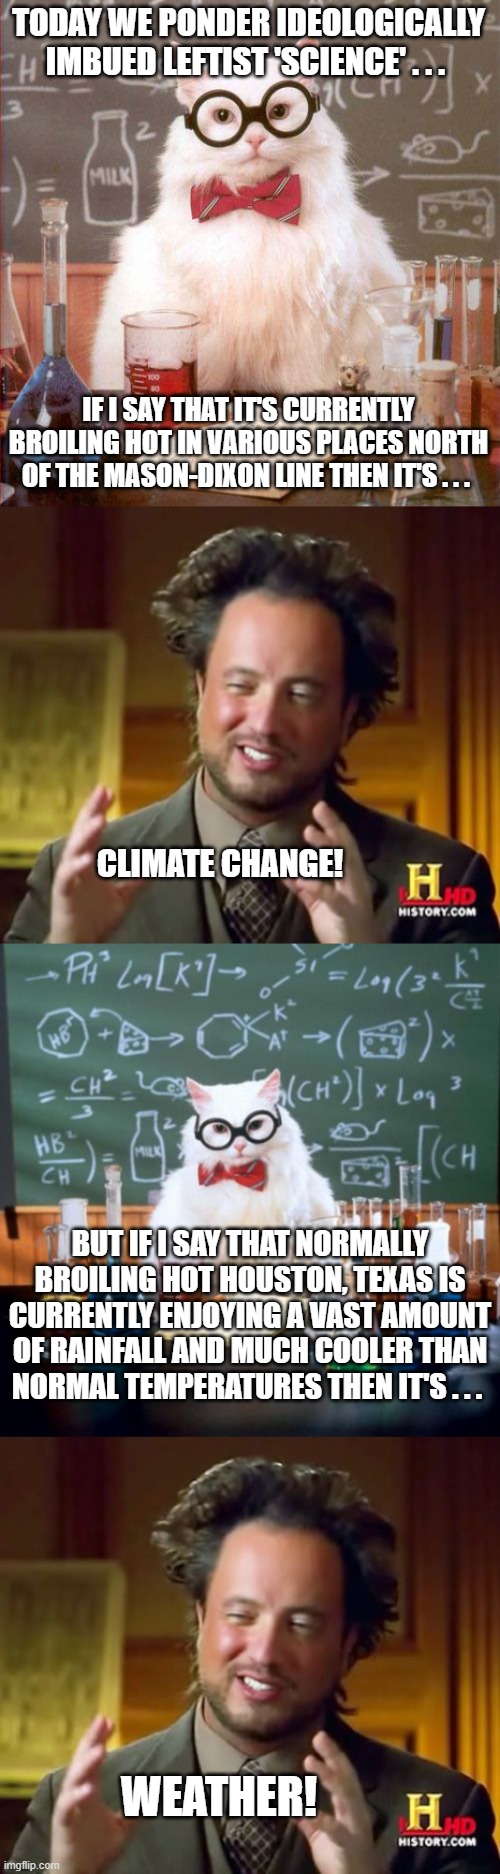 Leftist 'science' is relative in nature to their ideological messaging. | TODAY WE PONDER IDEOLOGICALLY IMBUED LEFTIST 'SCIENCE' . . . IF I SAY THAT IT'S CURRENTLY BROILING HOT IN VARIOUS PLACES NORTH OF THE MASON-DIXON LINE THEN IT'S . . . CLIMATE CHANGE! BUT IF I SAY THAT NORMALLY BROILING HOT HOUSTON, TEXAS IS CURRENTLY ENJOYING A VAST AMOUNT OF RAINFALL AND MUCH COOLER THAN NORMAL TEMPERATURES THEN IT'S . . . WEATHER! | image tagged in science cat,leftist messaging,climate change,weather | made w/ Imgflip meme maker